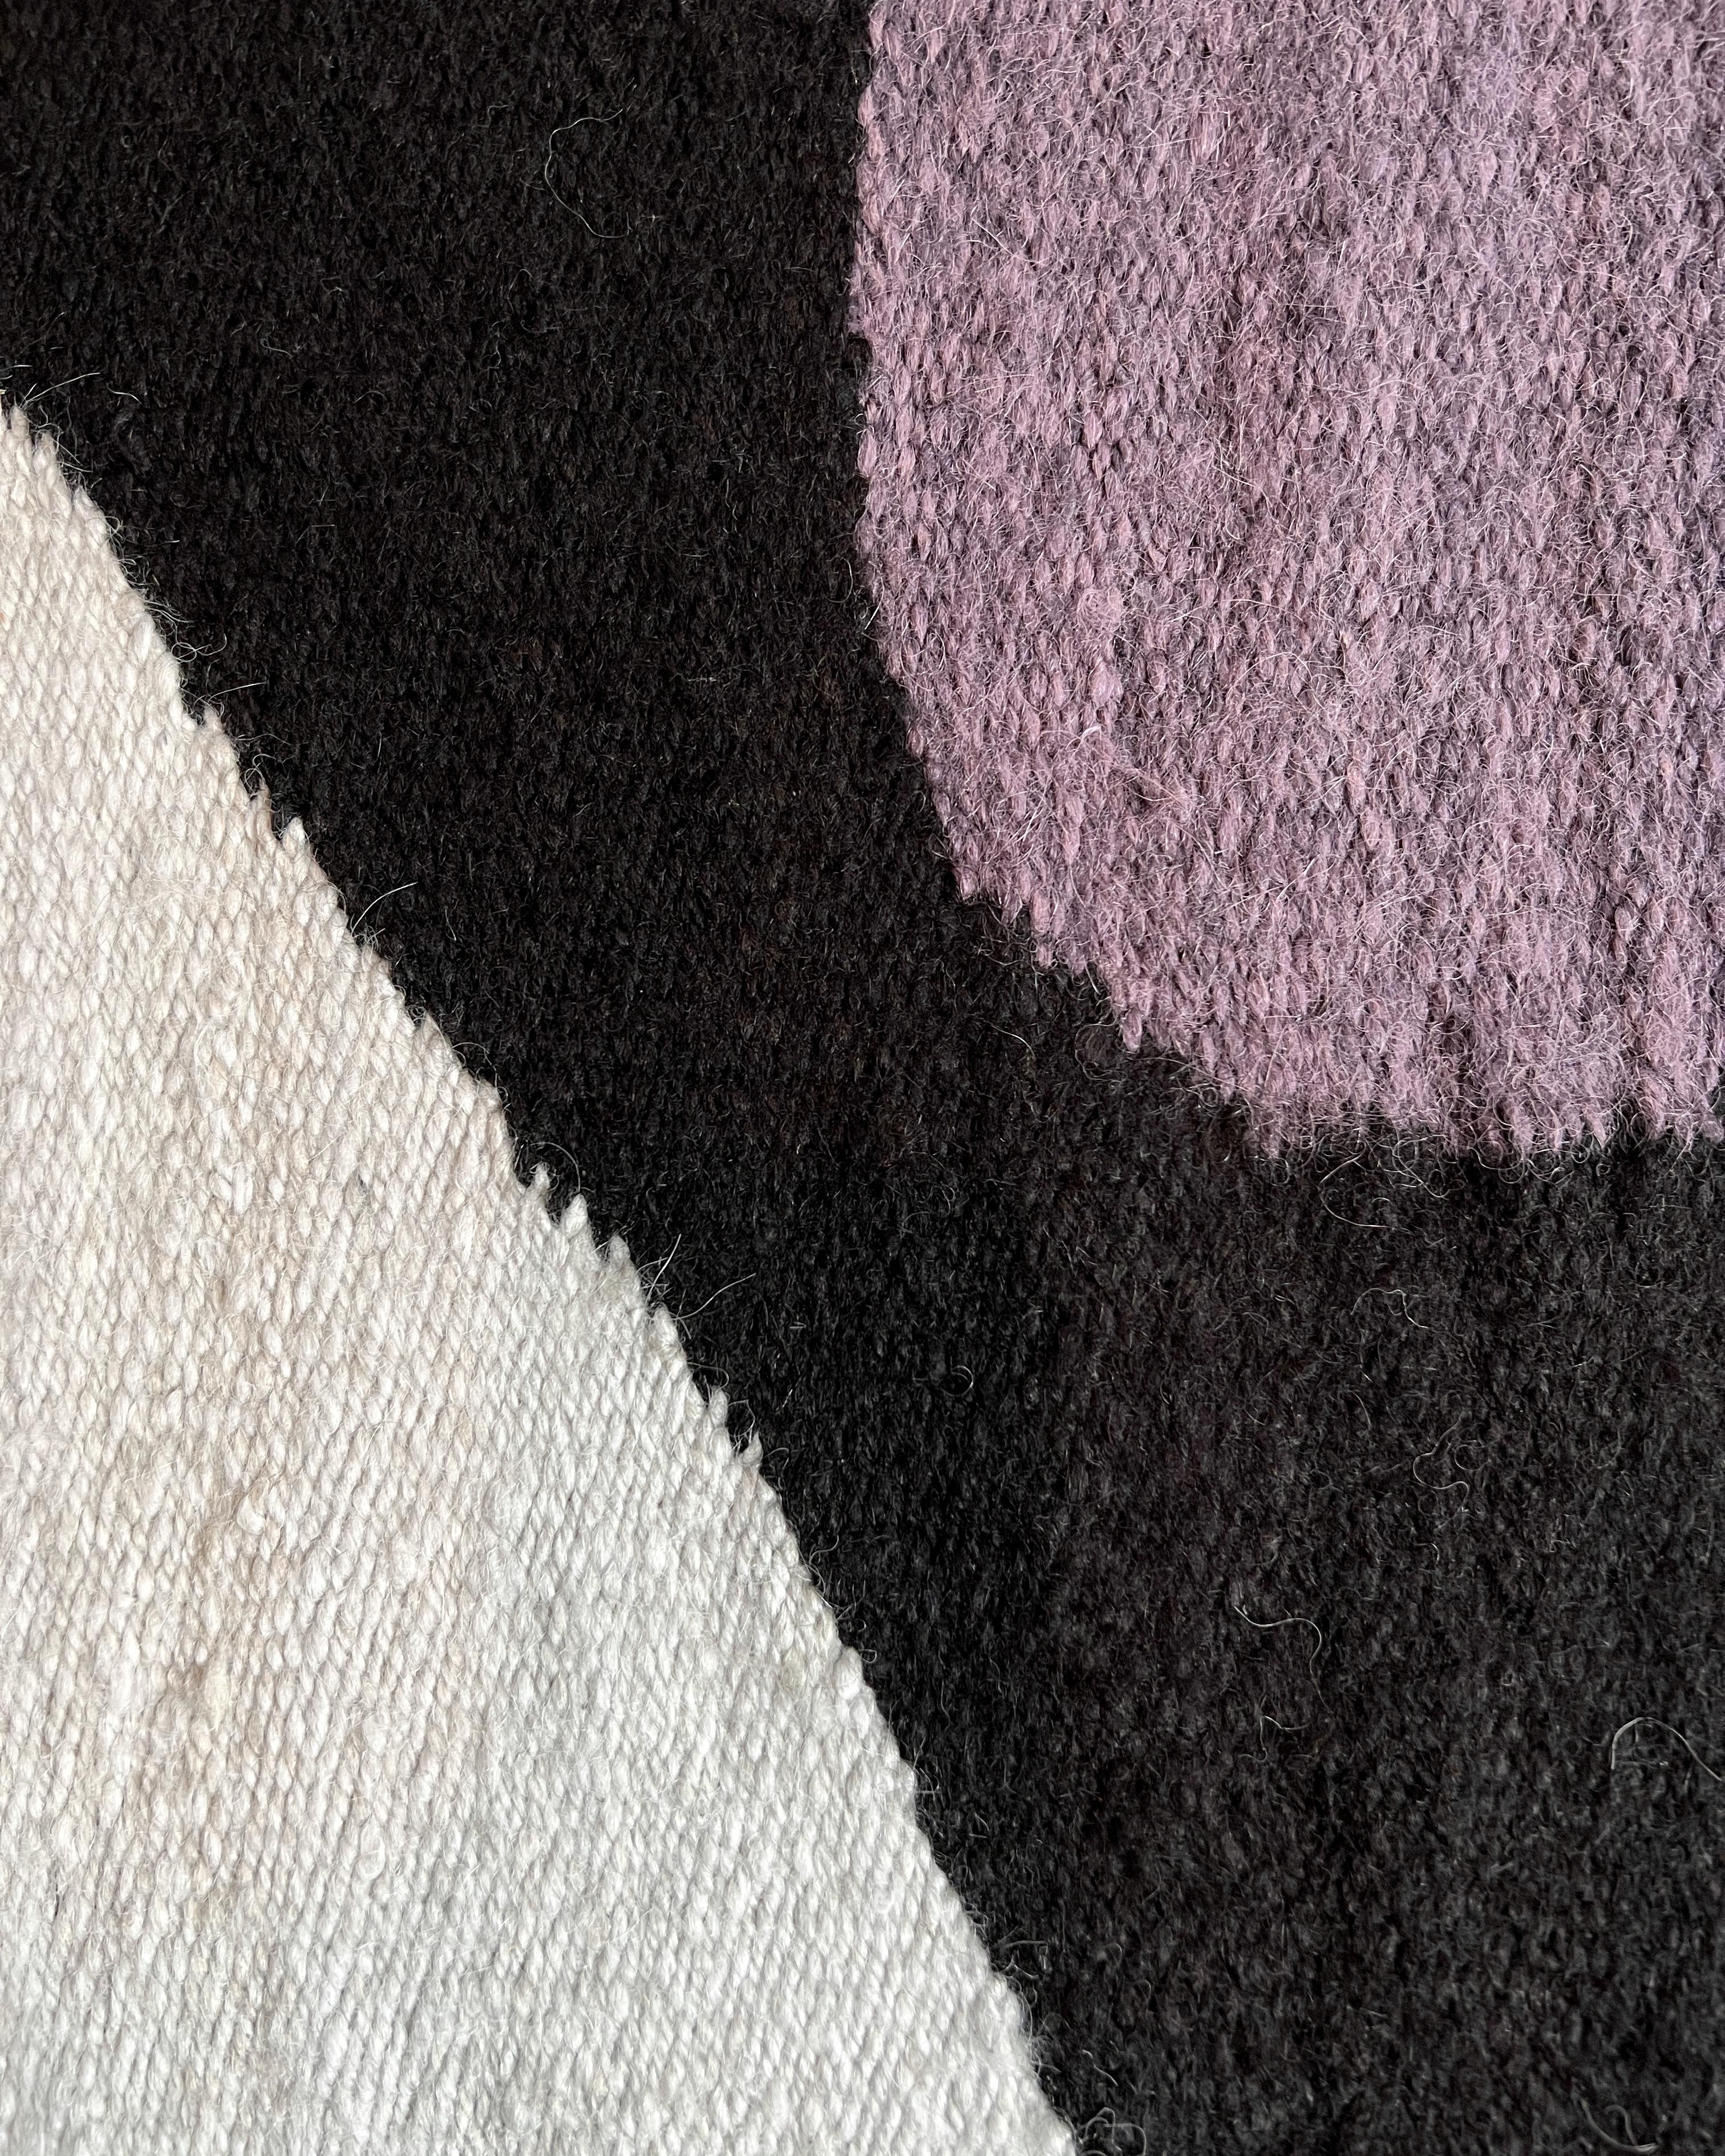 Adapted from the original design by Marcela Cabutti, Lluvia Gris, 2017.

LALANA RUGS is an applied arts initiative born from the desire to combine proposals by contemporary artists with traditional local techniques and noble materials. The three